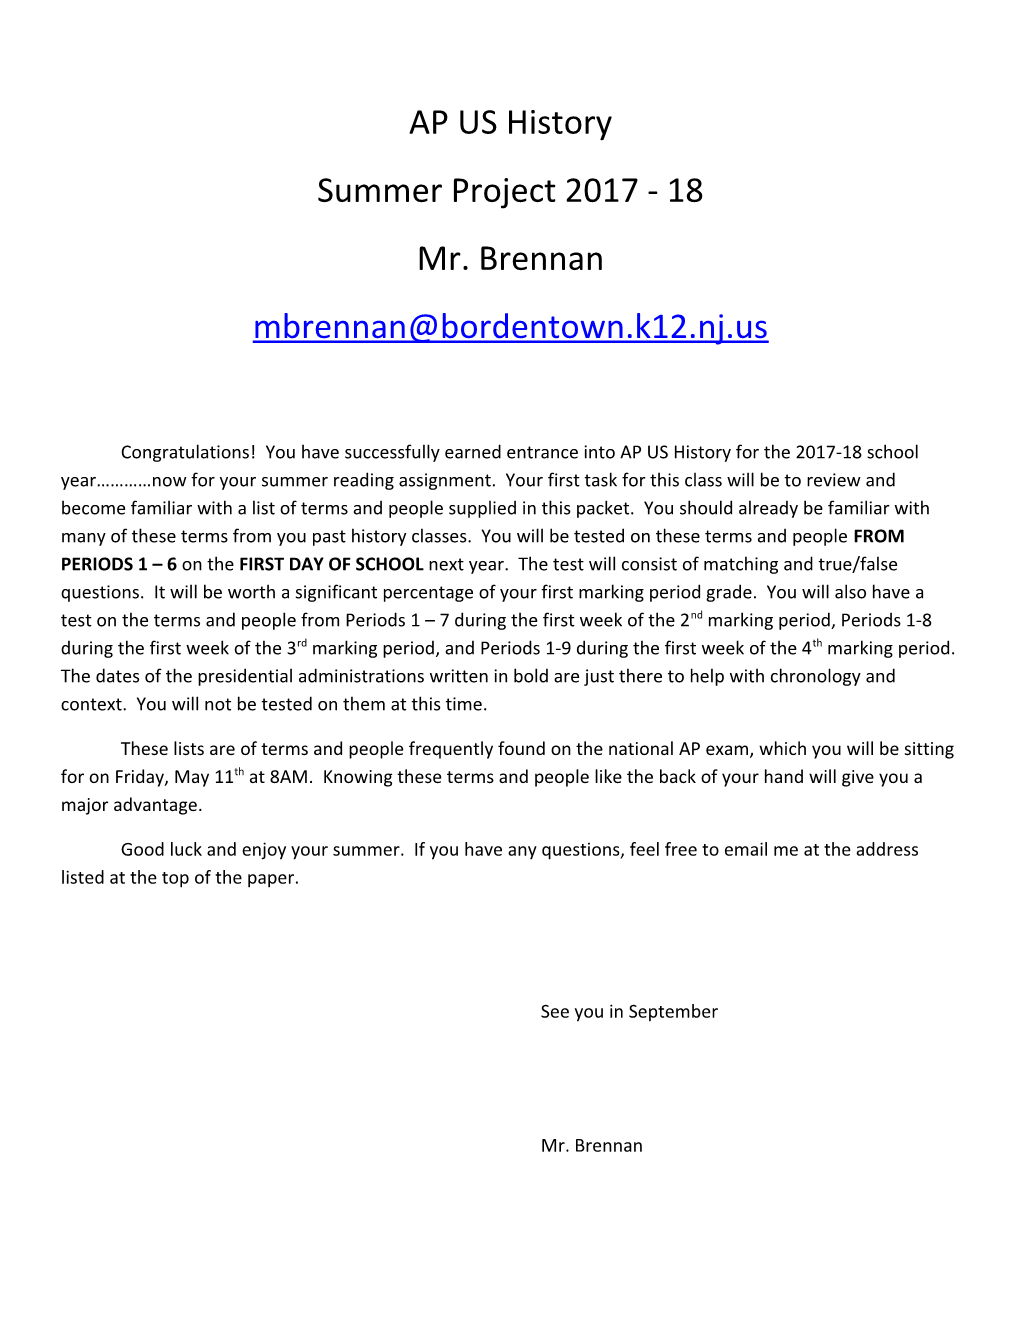 Summer Project 2017 - 18